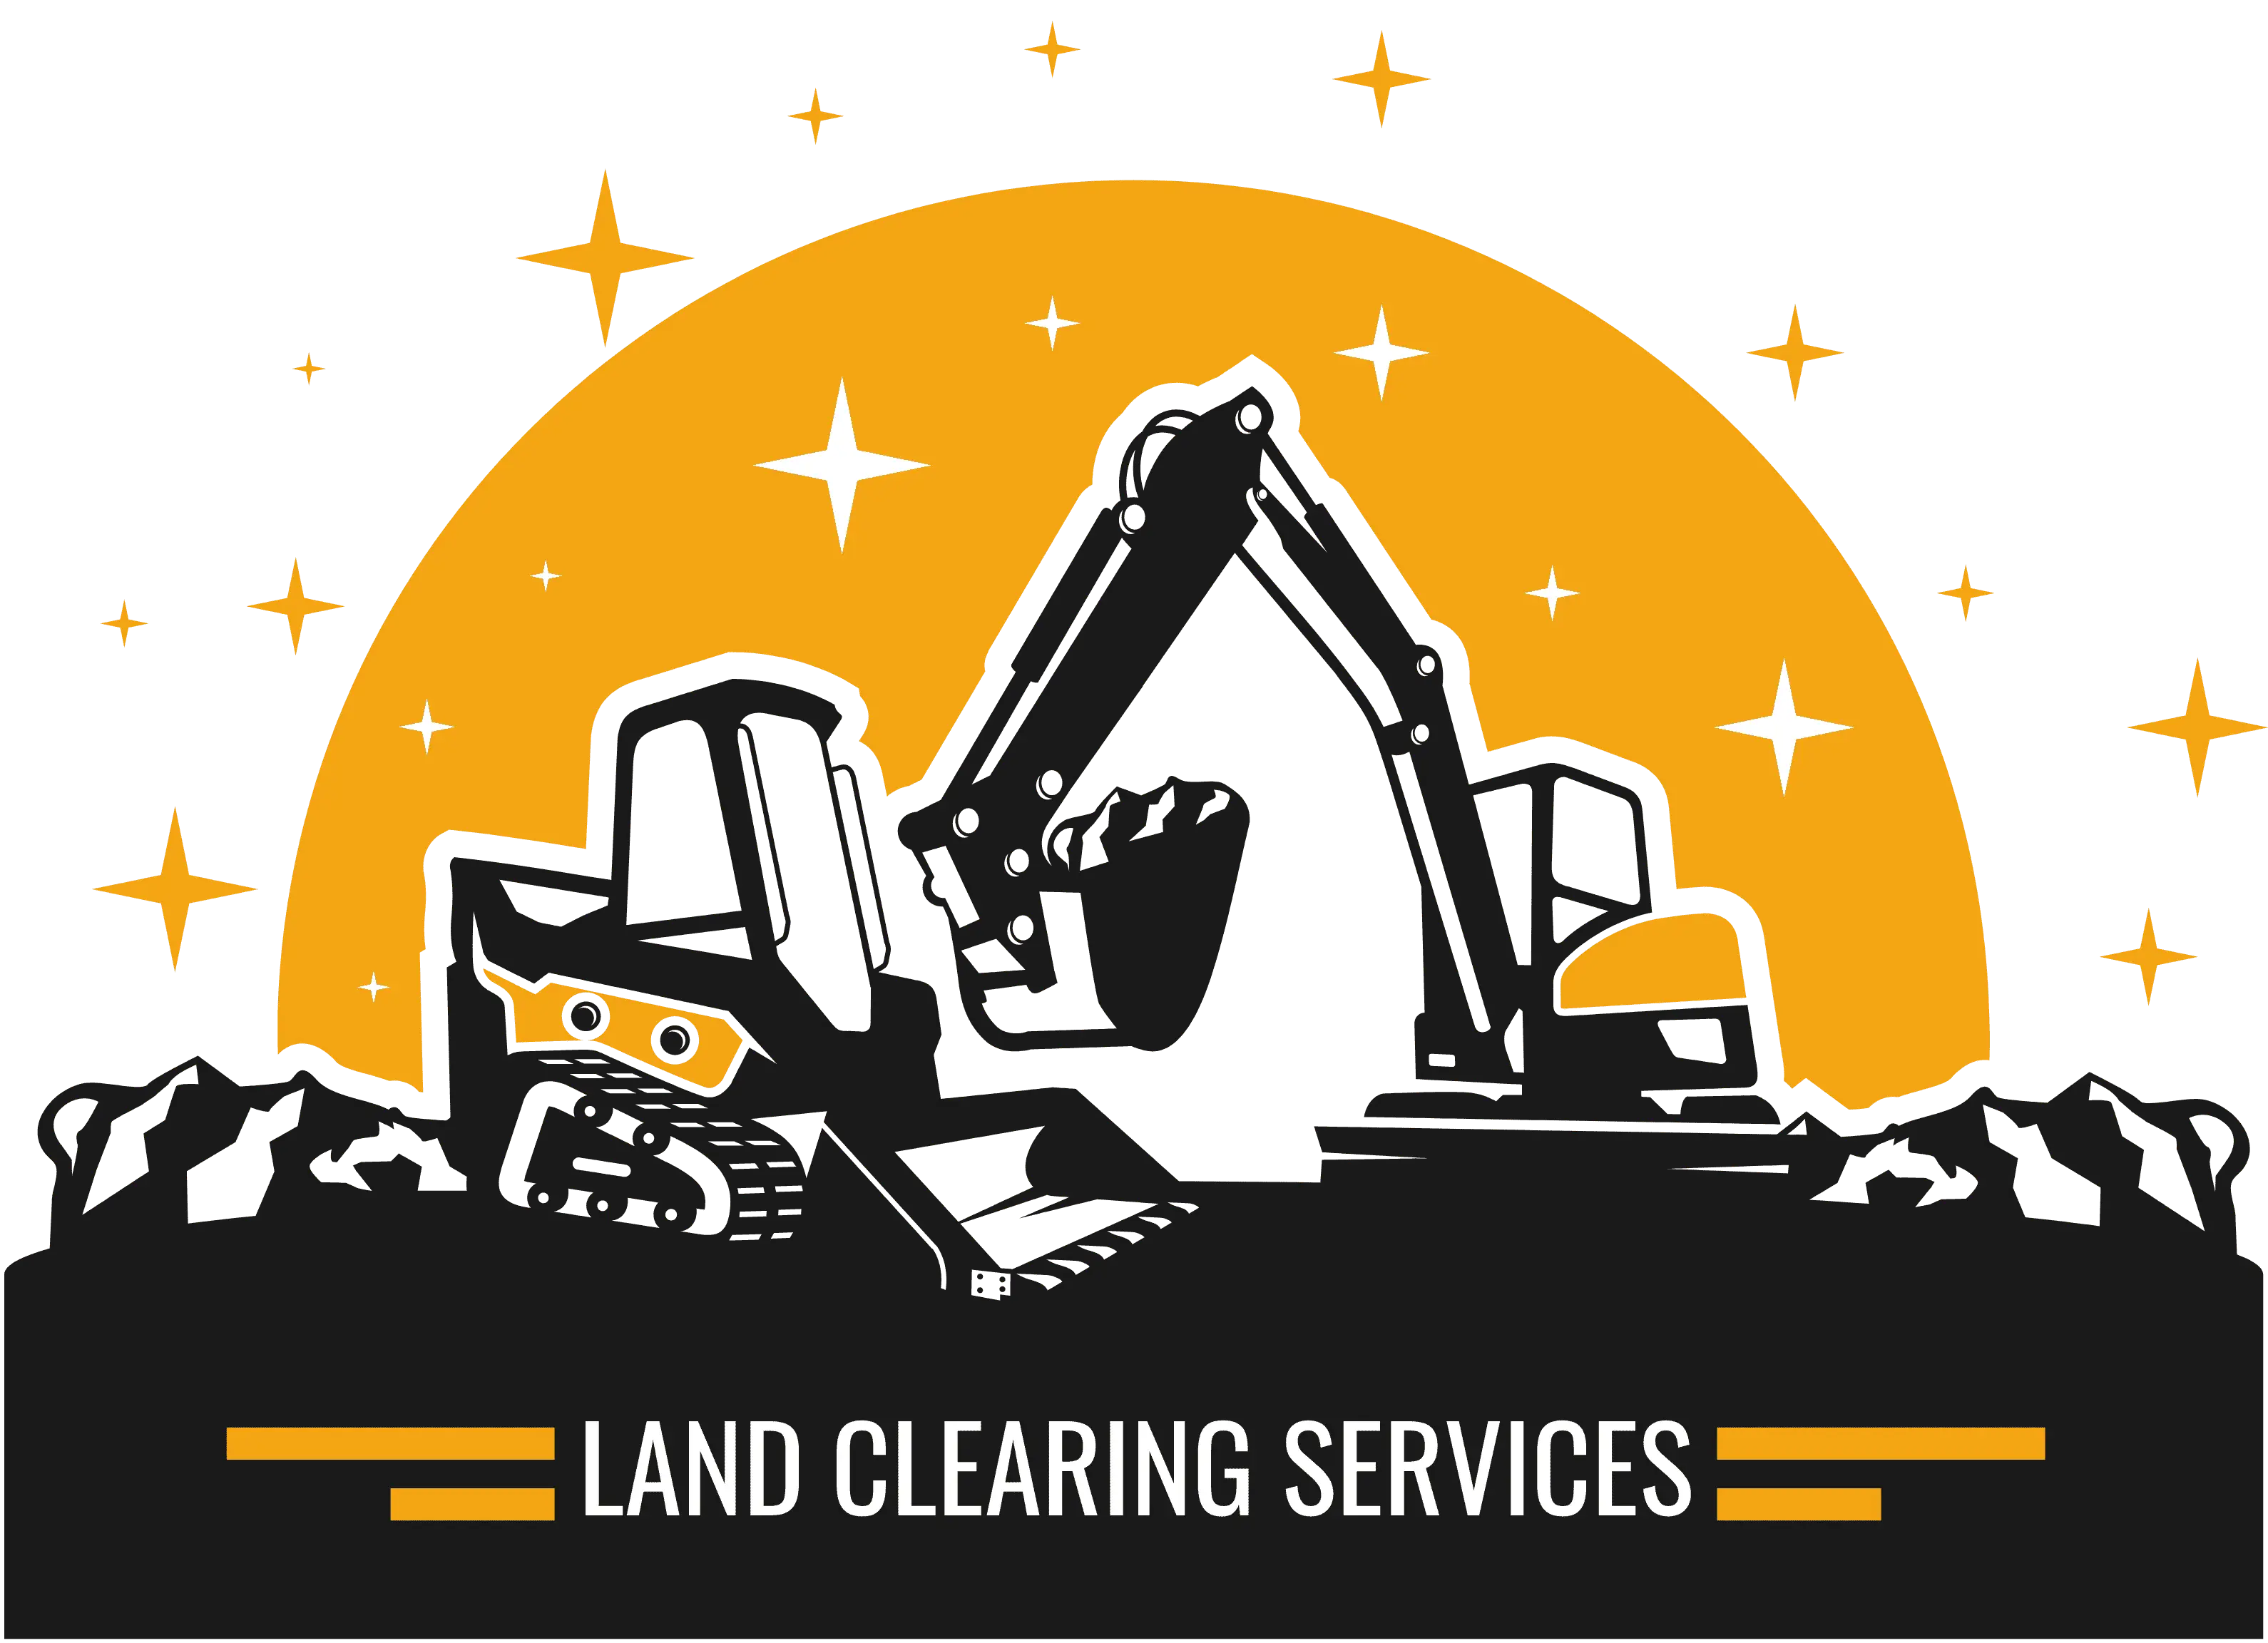 Excavator Rental. Land Clearing Services